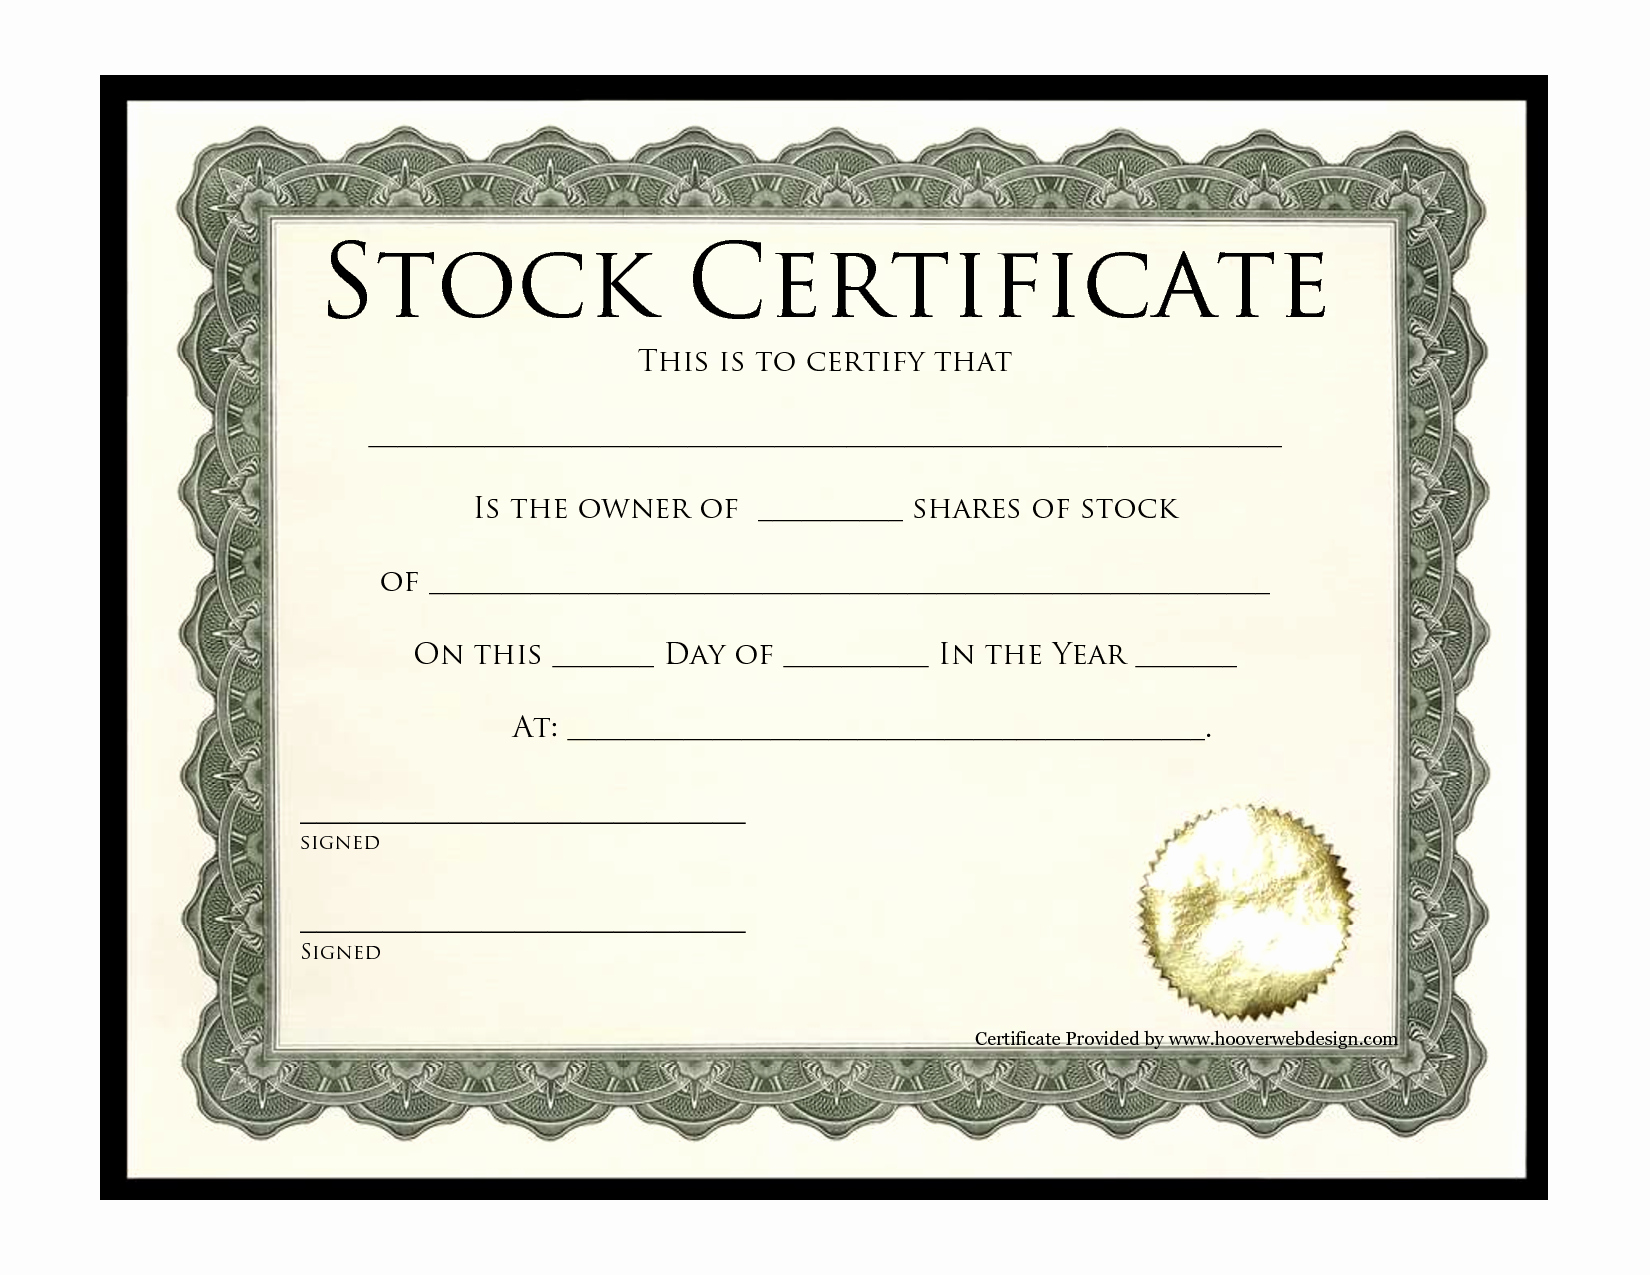 Blank Stock Certificate Template Free Lovely Stock Certificate Template